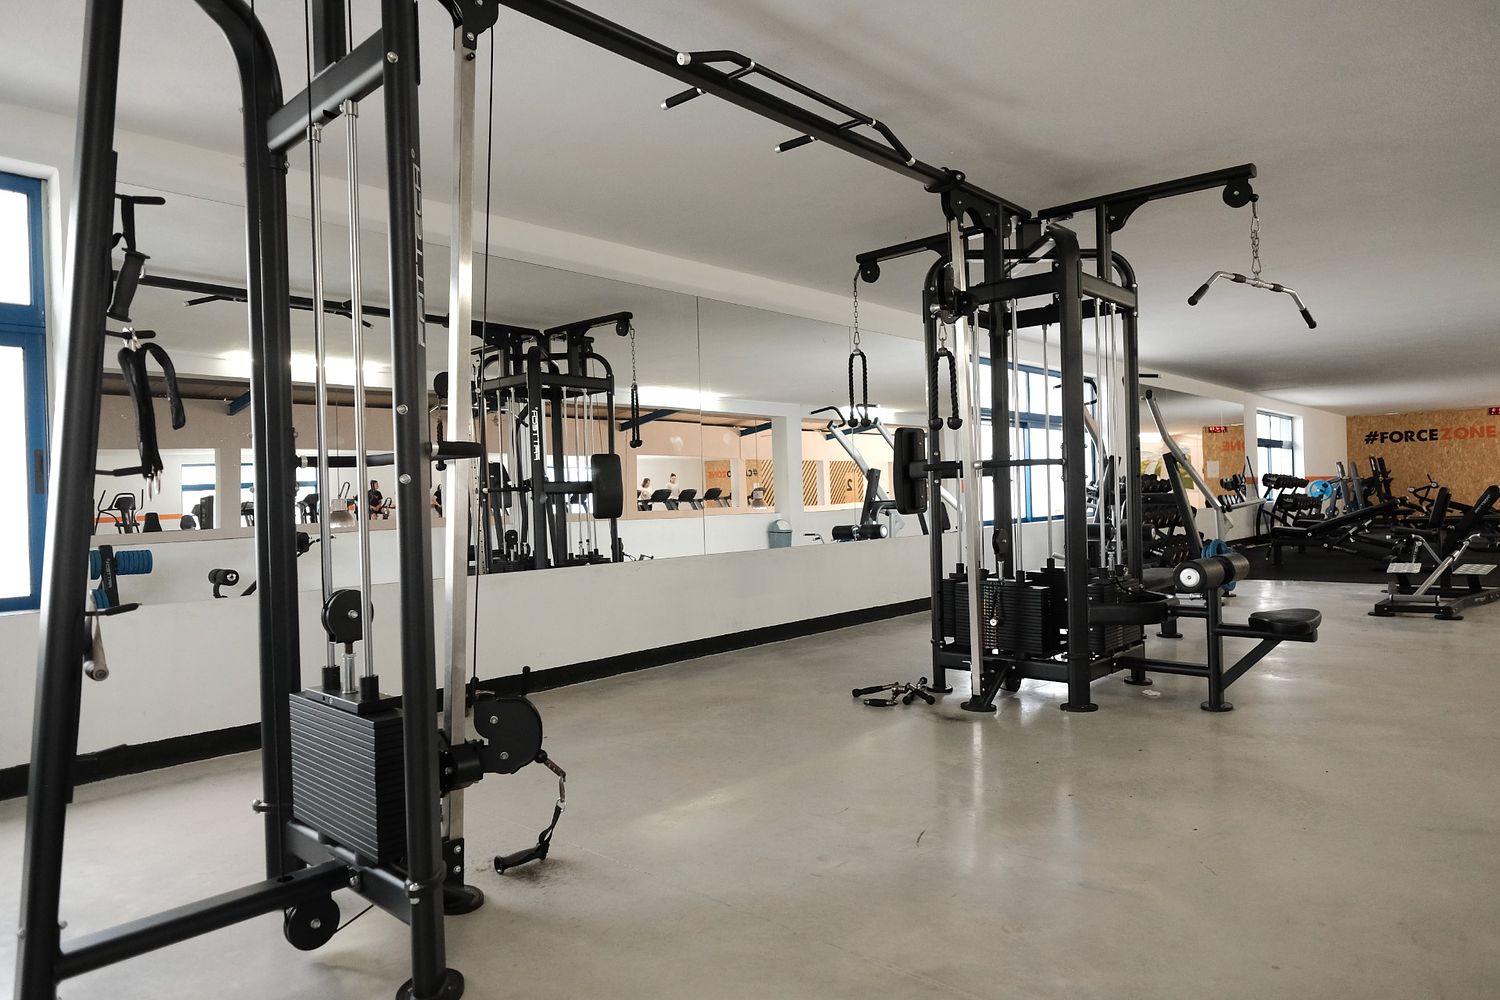 Go Fitness Fafe Zona Industrial gym in Fafe, Portugal